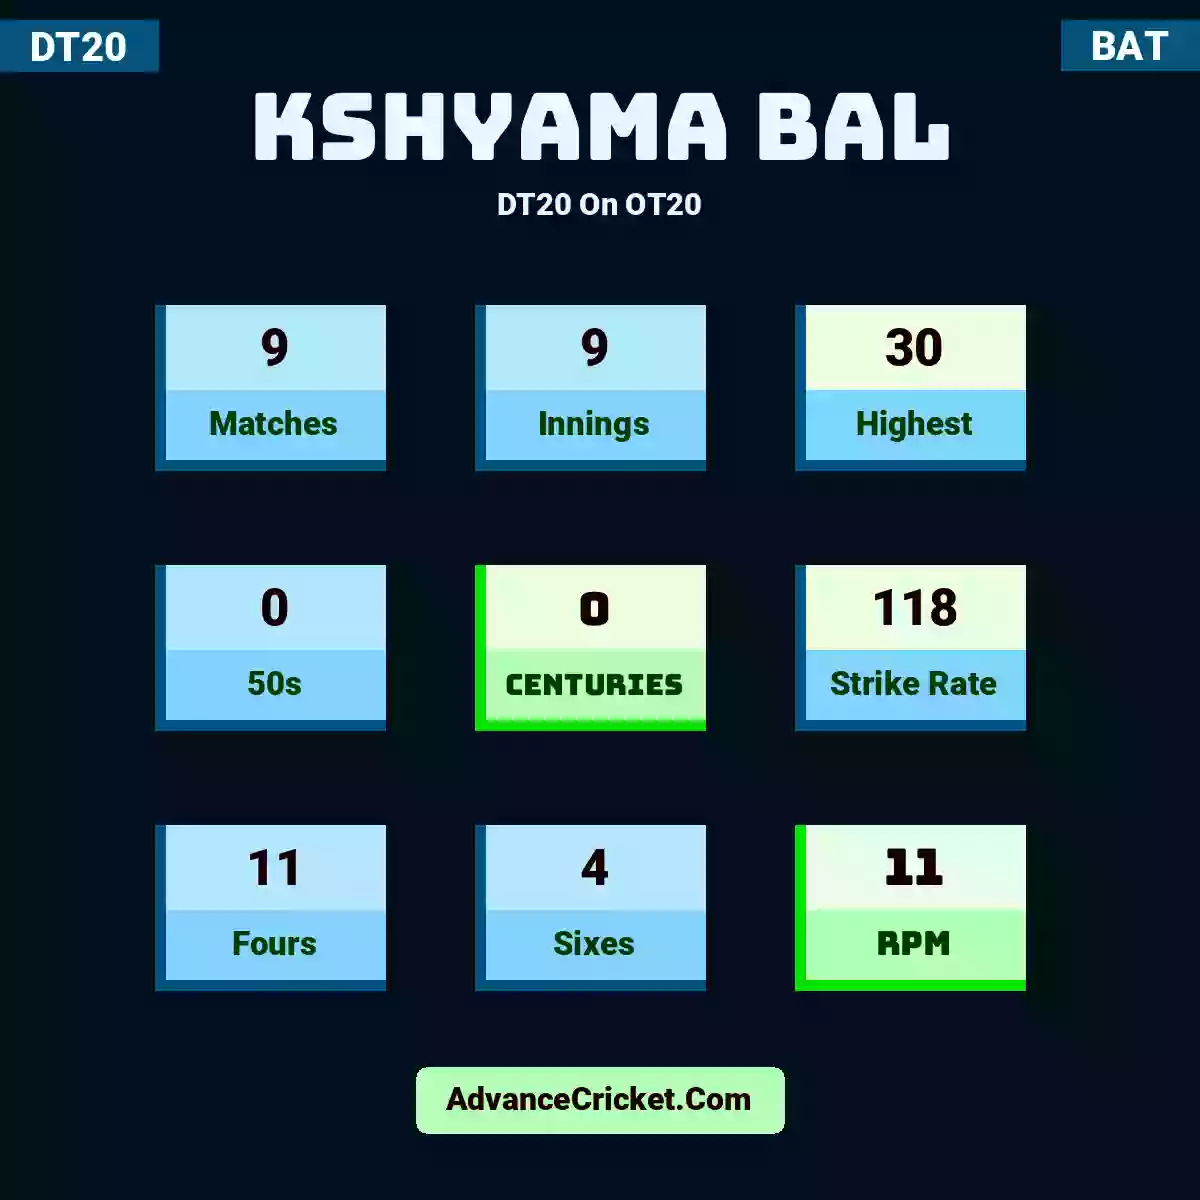 Kshyama Bal DT20  On OT20, Kshyama Bal played 9 matches, scored 30 runs as highest, 0 half-centuries, and 0 centuries, with a strike rate of 118. K.Bal hit 11 fours and 4 sixes, with an RPM of 11.